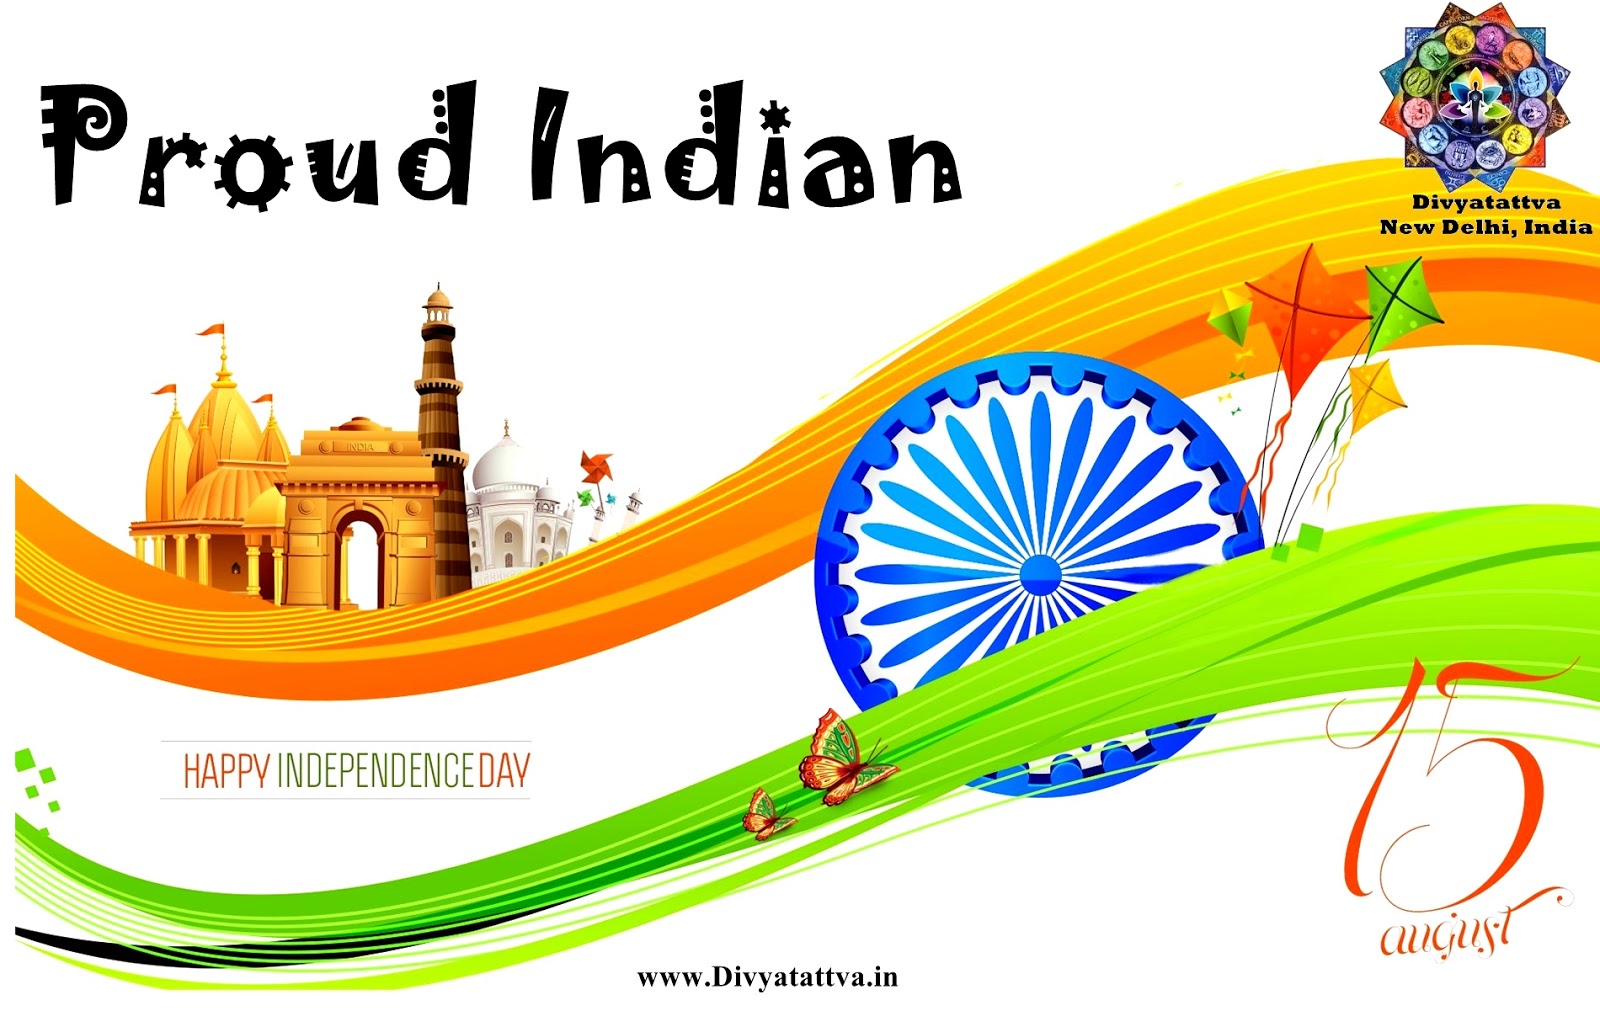 Happy 15th August India Independence Day wallpaper Full Size Images,  Pictures, Photos